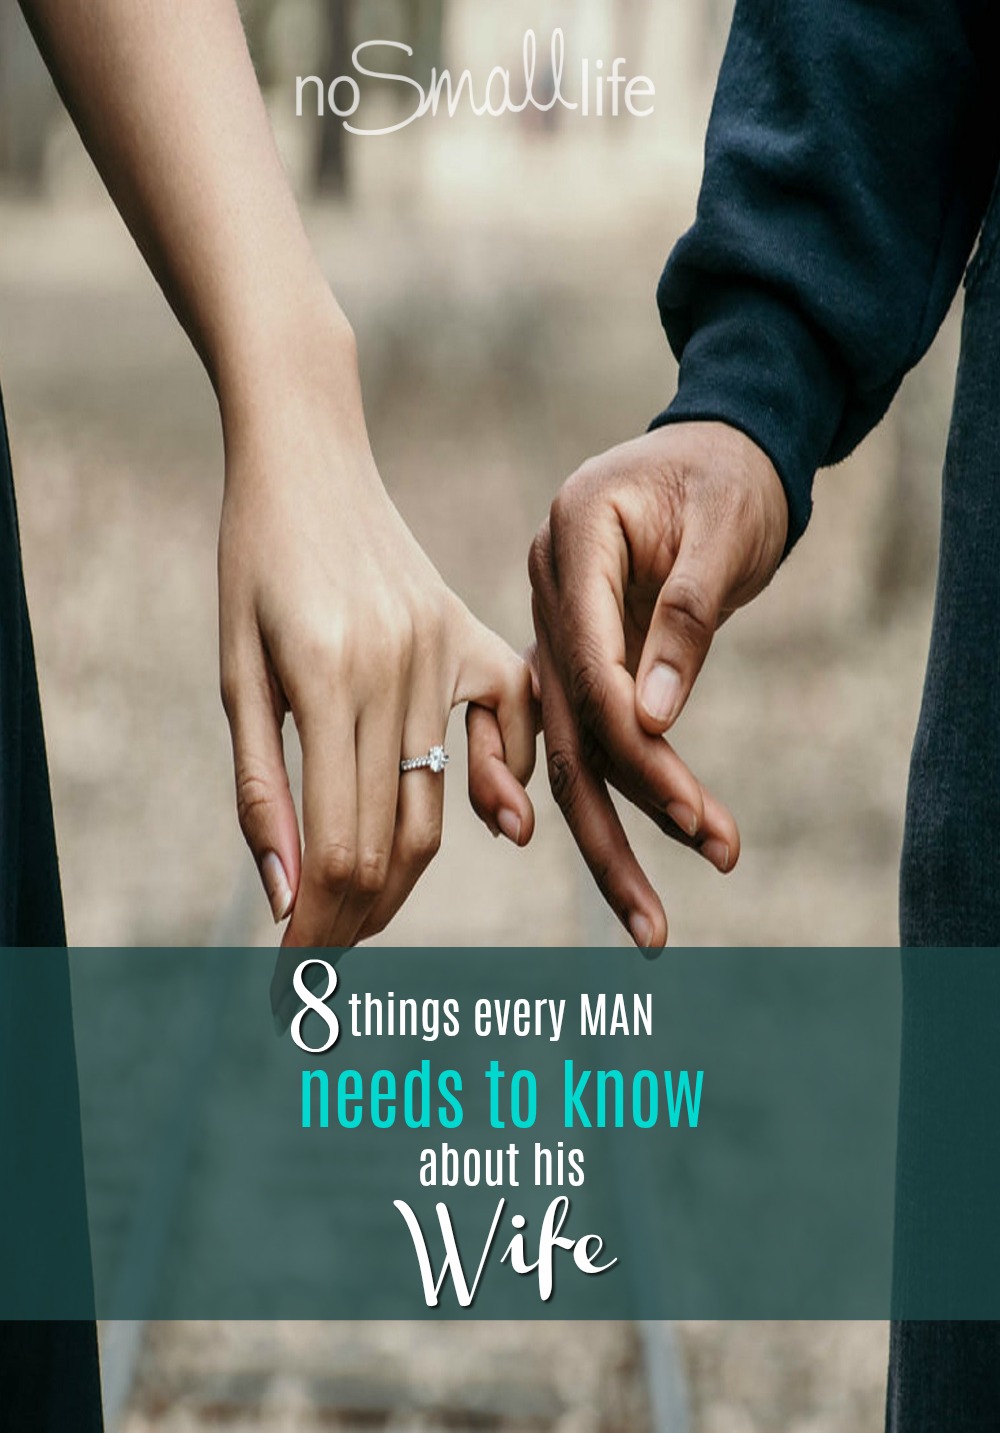 8 Things Every man needs to know about his wife